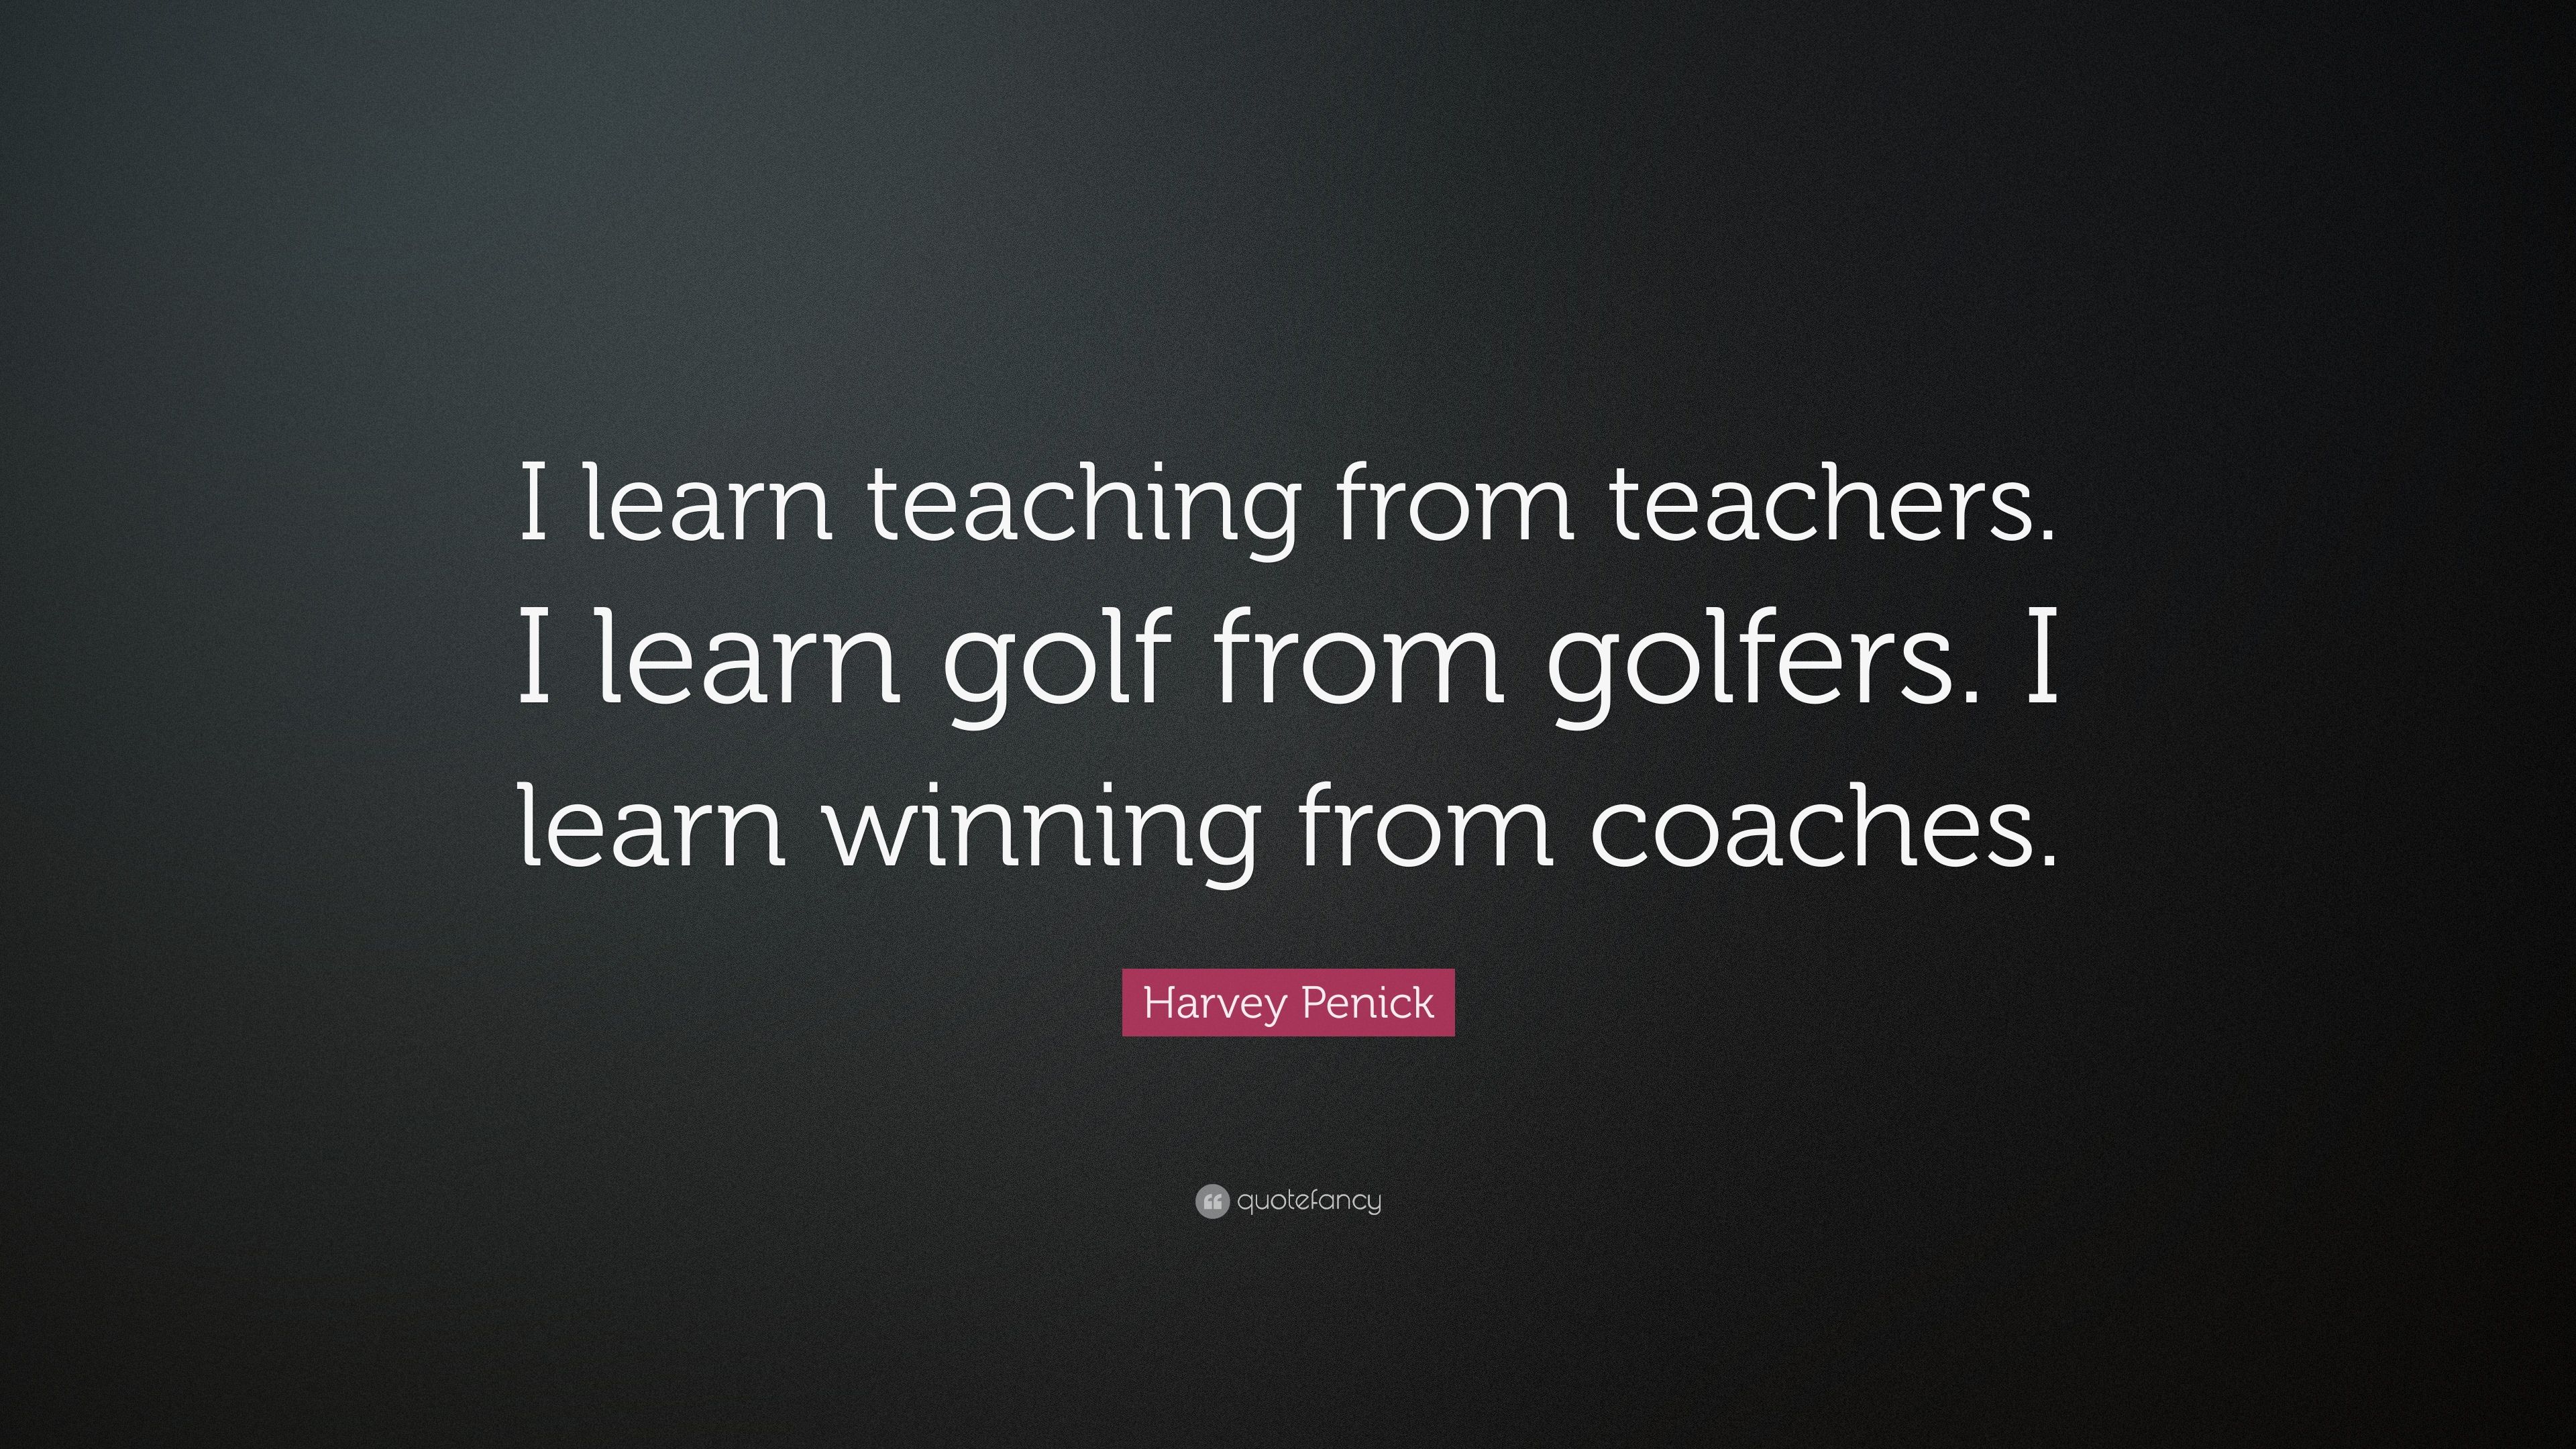 Harvey Penick Quote: “I learn teaching from teachers. I learn golf